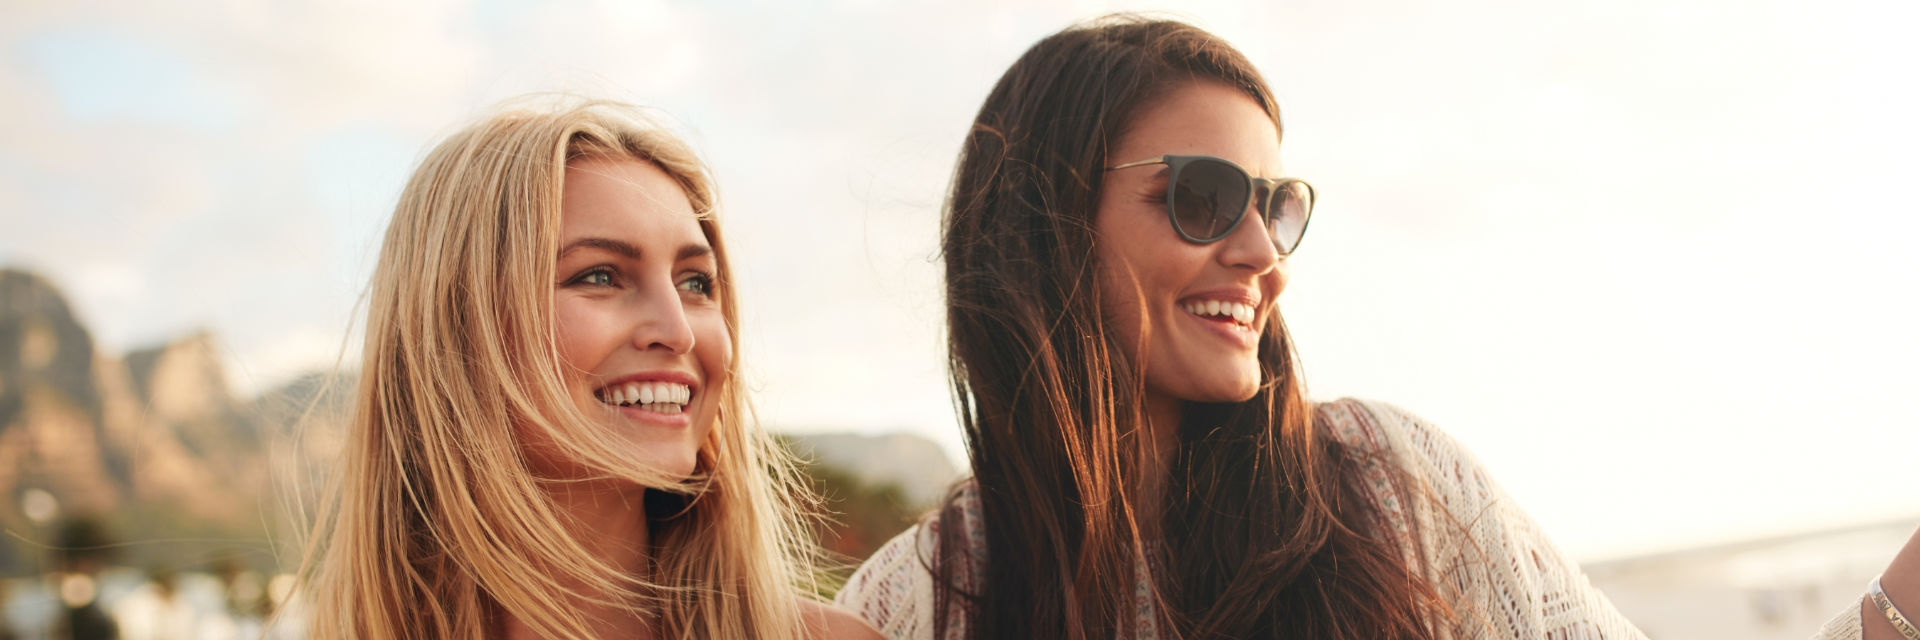 Two beautiful young women with perfect smiles enjoying a day outdoors.